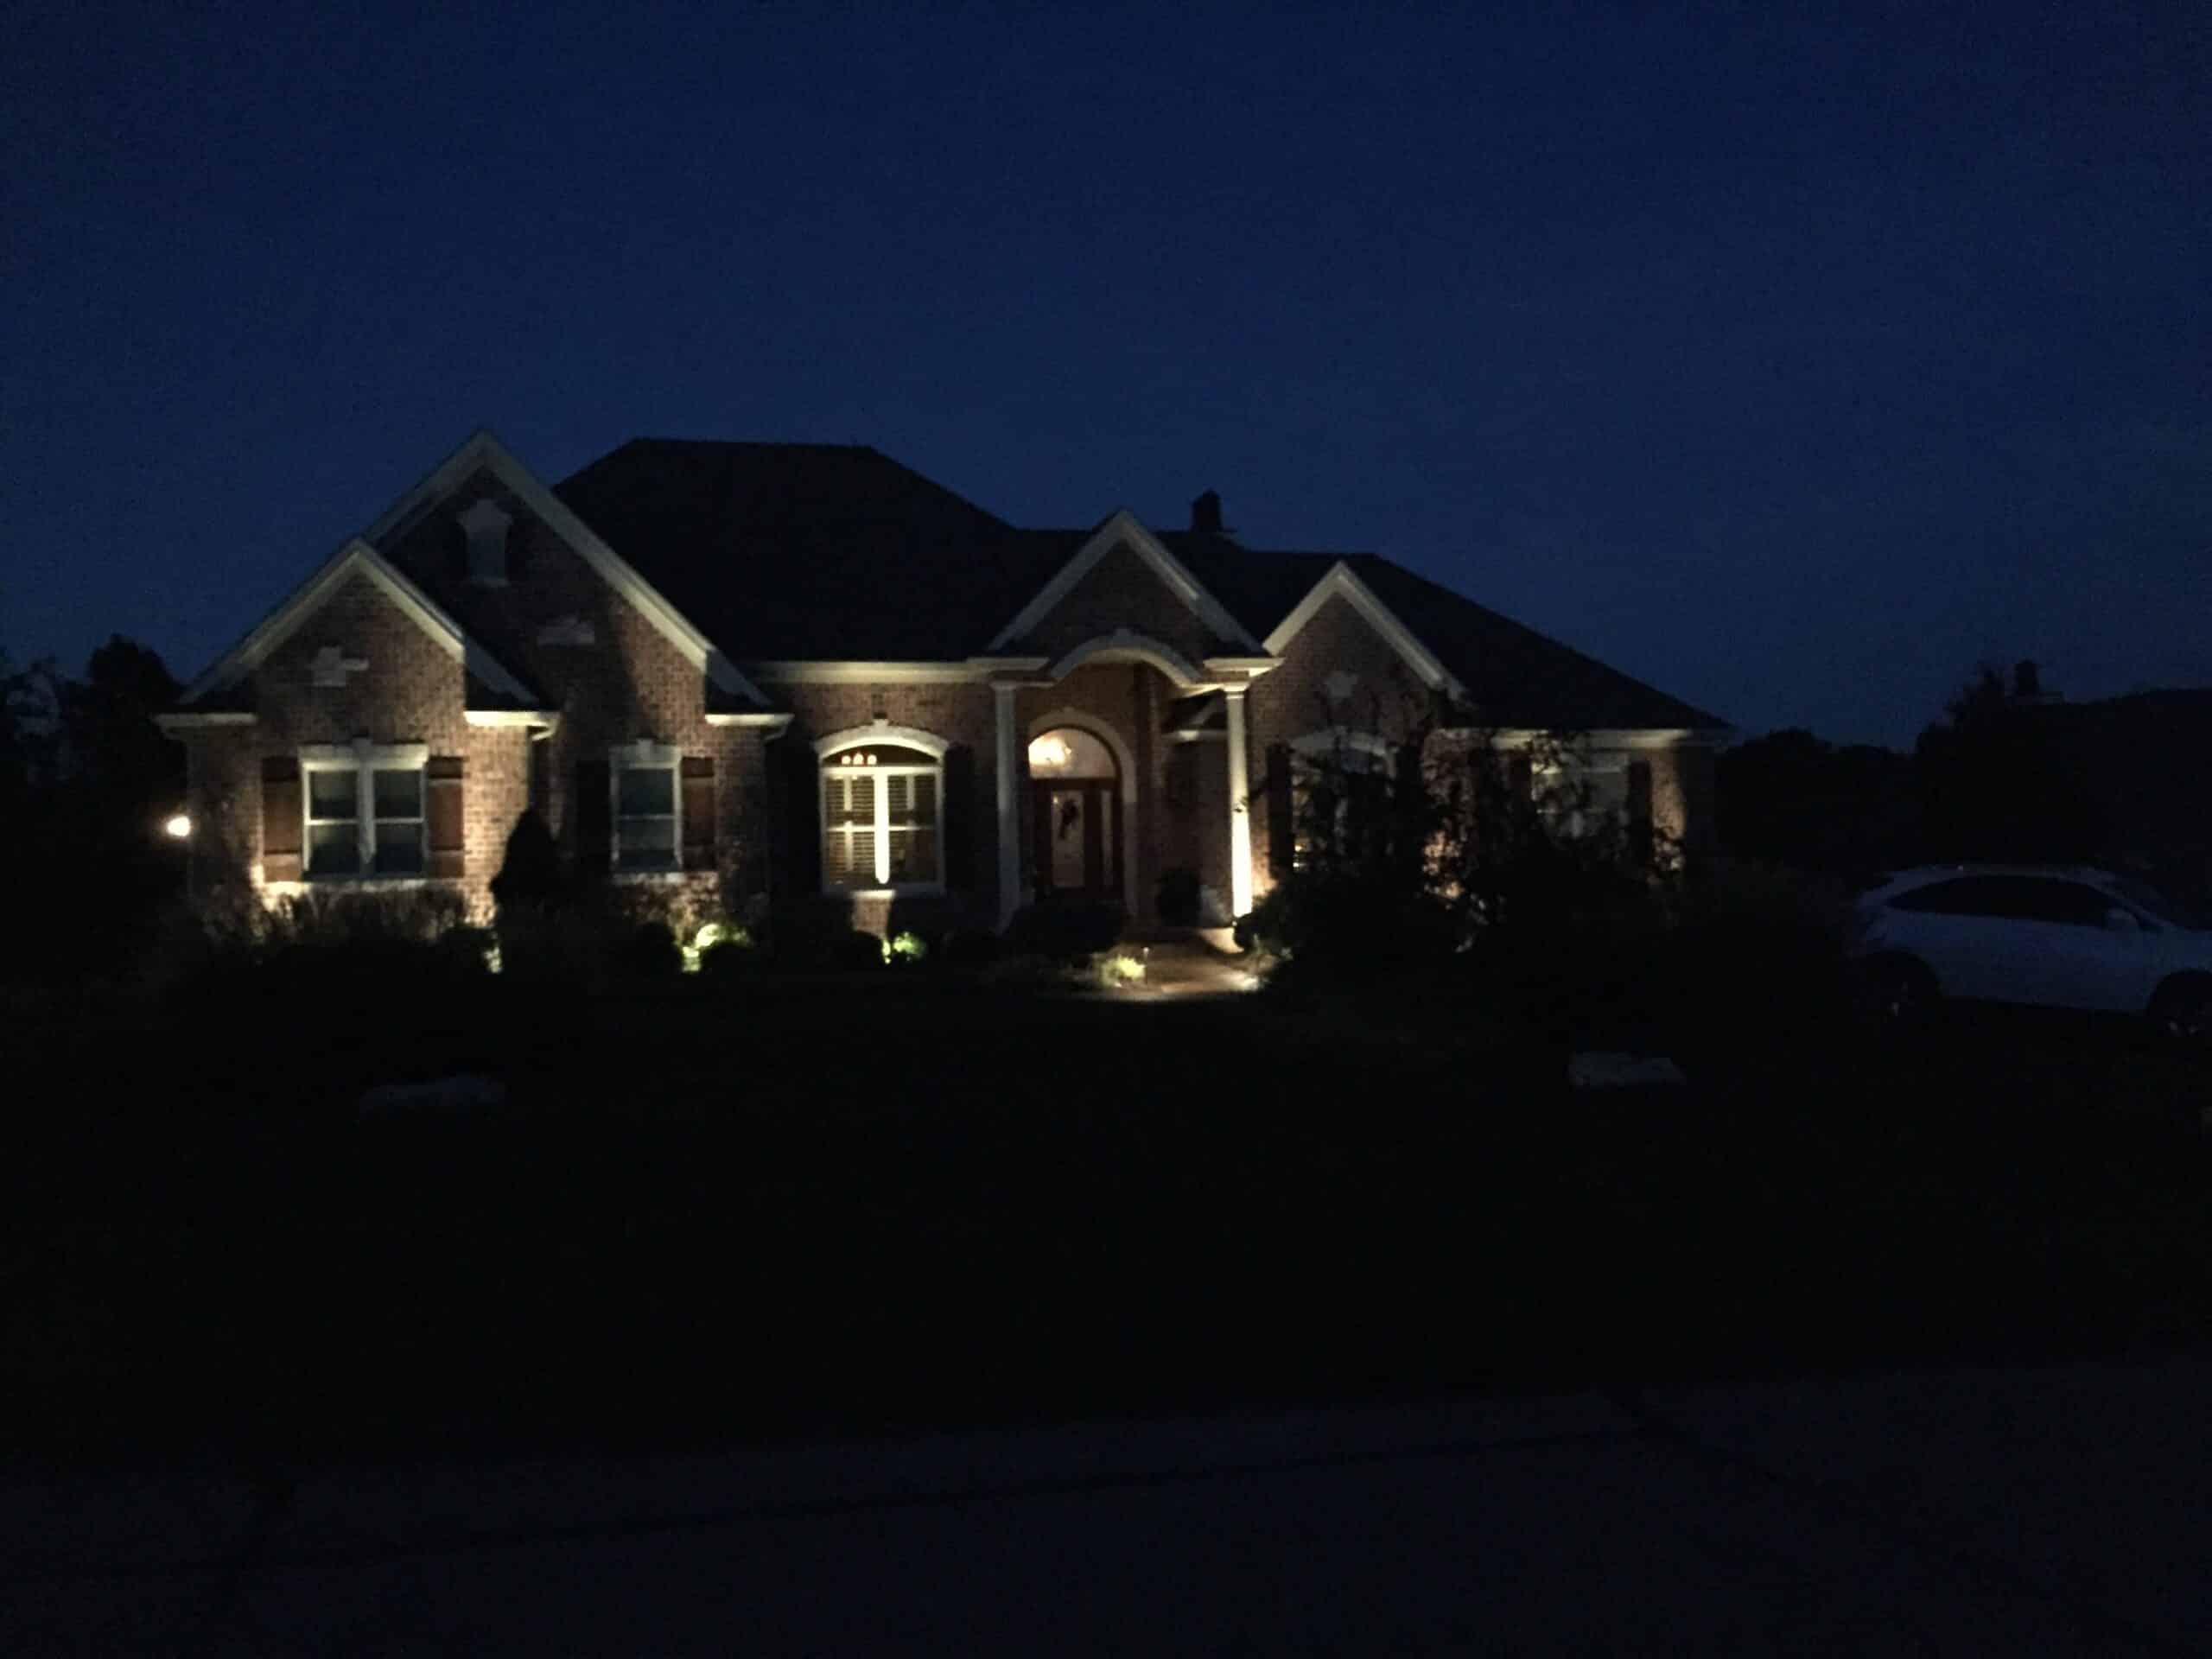 House at Night with Exterior Lighting